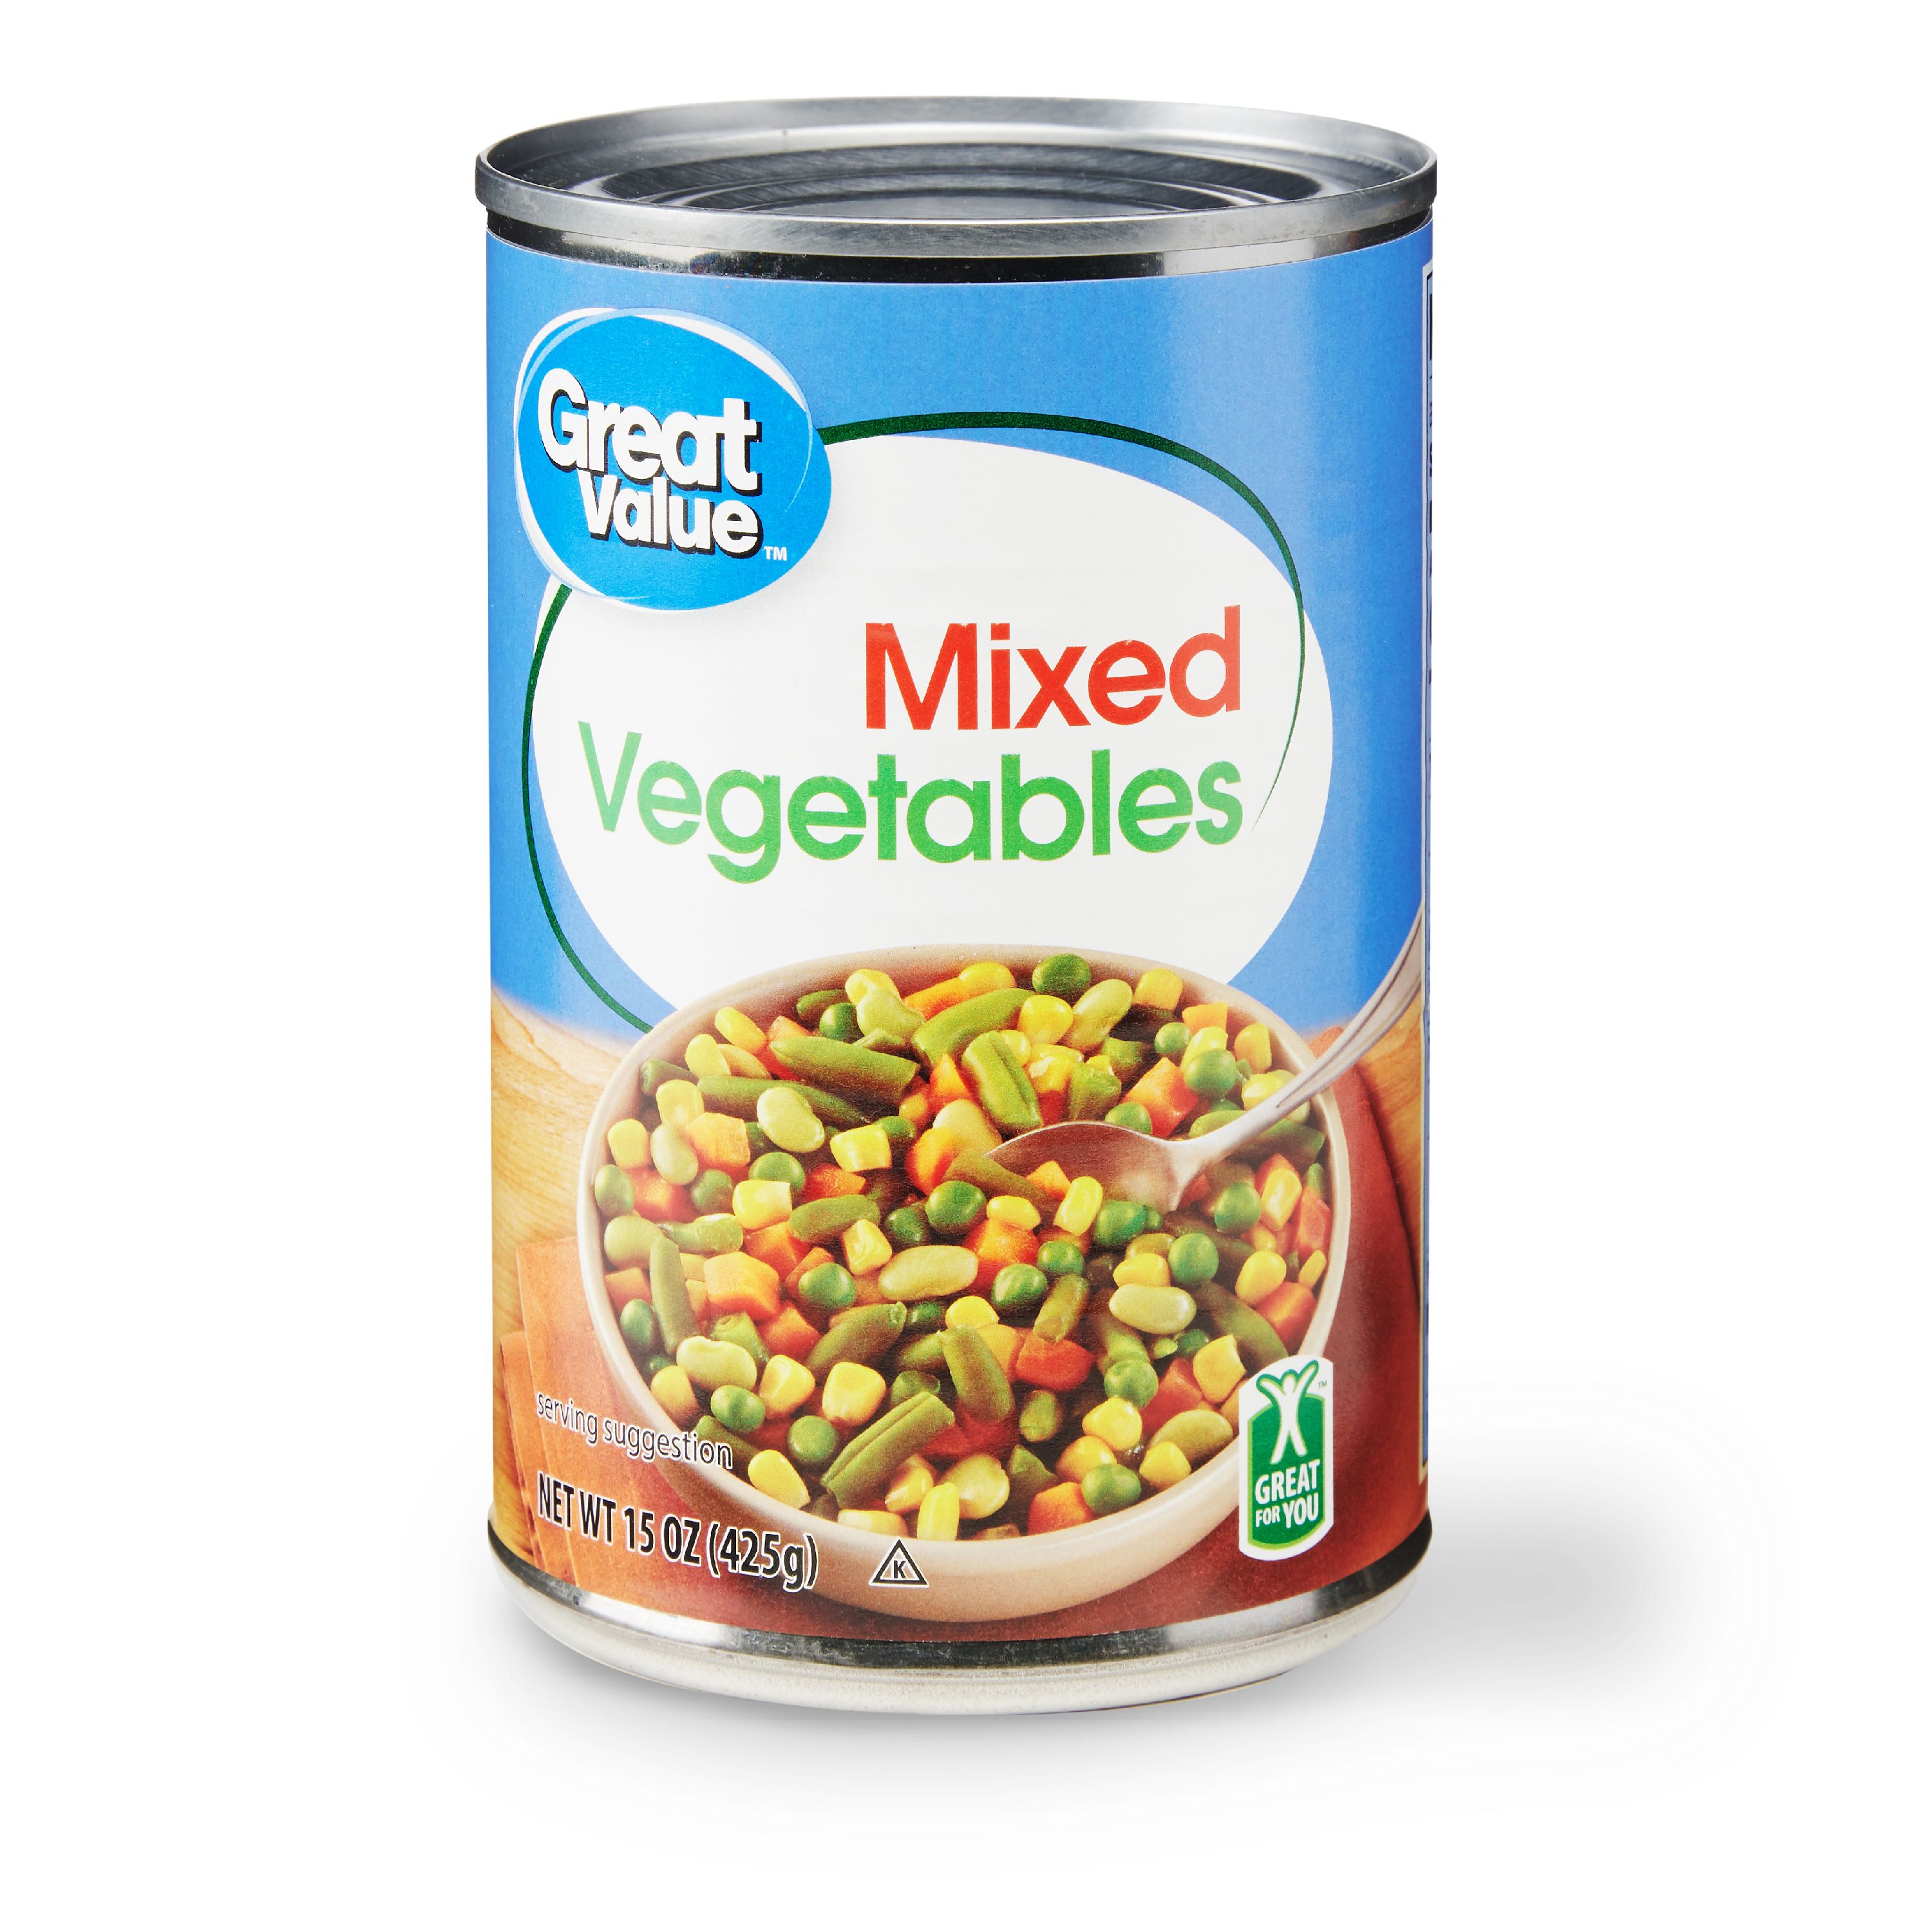 (6 Pack) Great Value Mixed Vegetables, 15 Oz Image